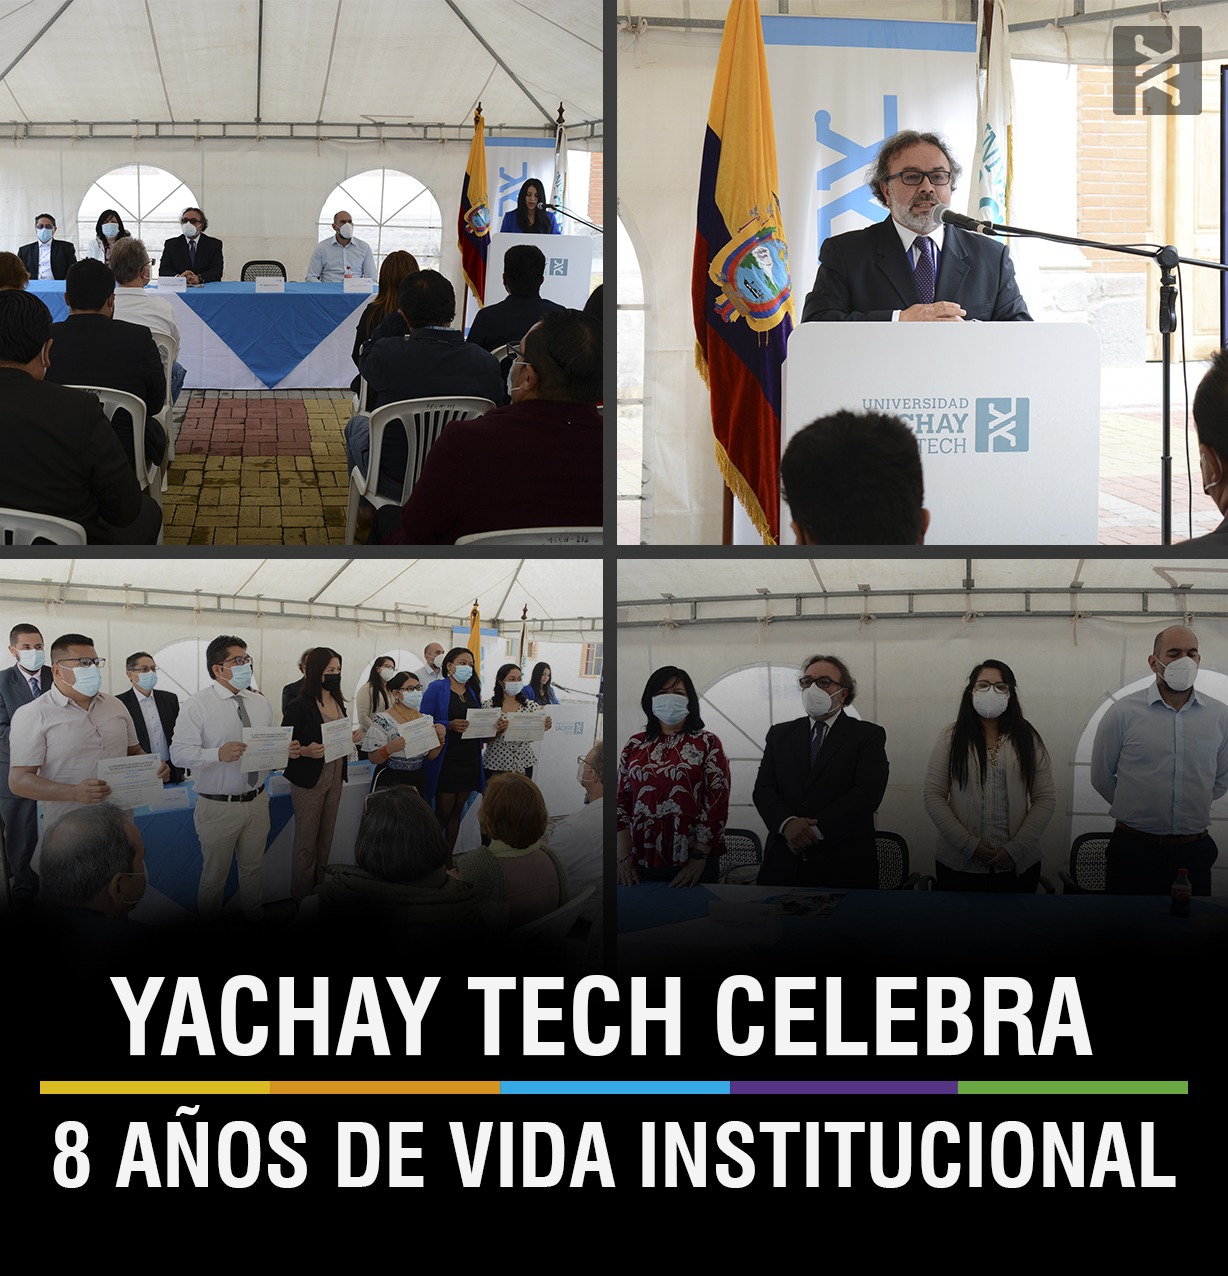 YACHAY TECH CELEBRATES 8 YEARS OF INSTITUTIONAL LIFE